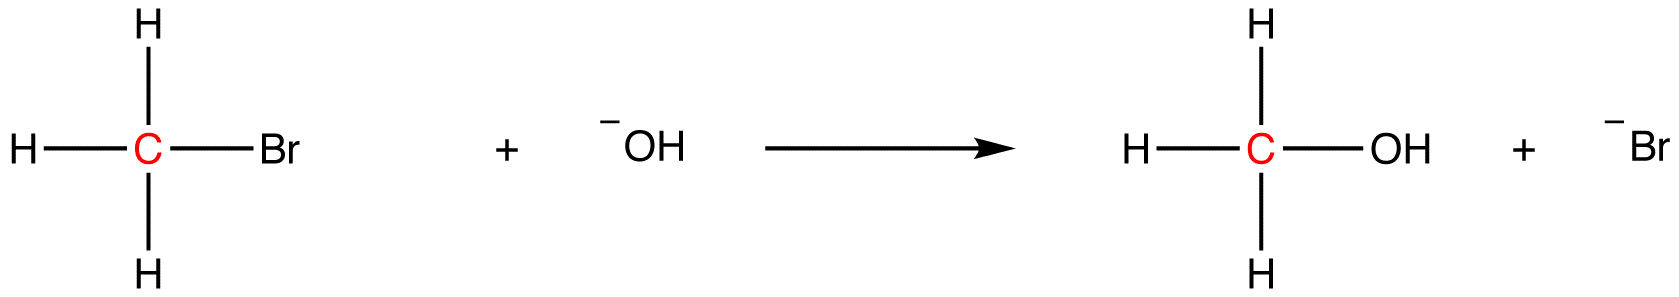 nulceophilicaliphaticsubstitution1.png